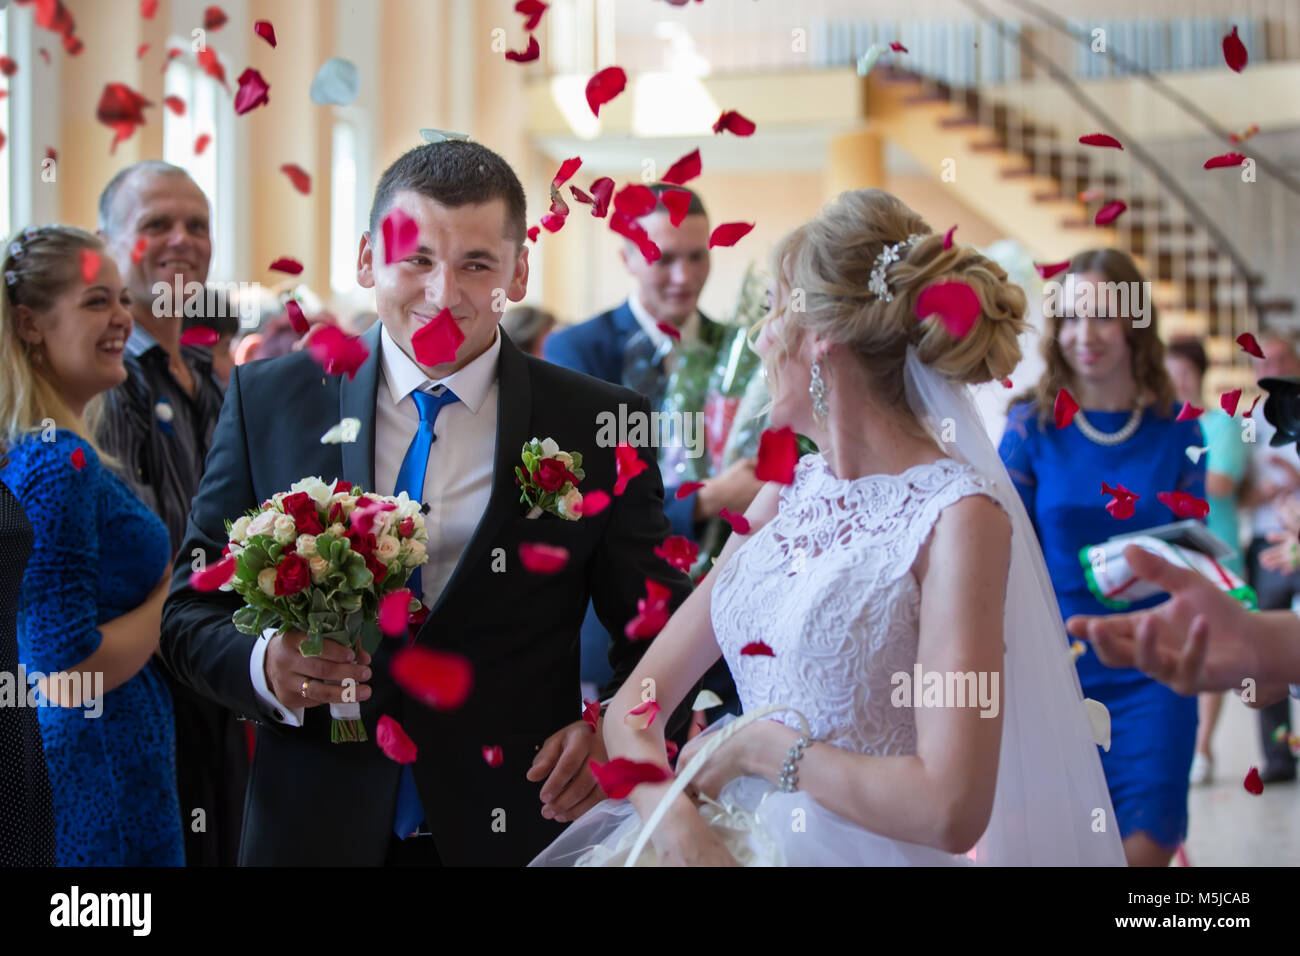 on the bride and groom throw rose petals. Bride and groom happy in rose petals Stock Photo